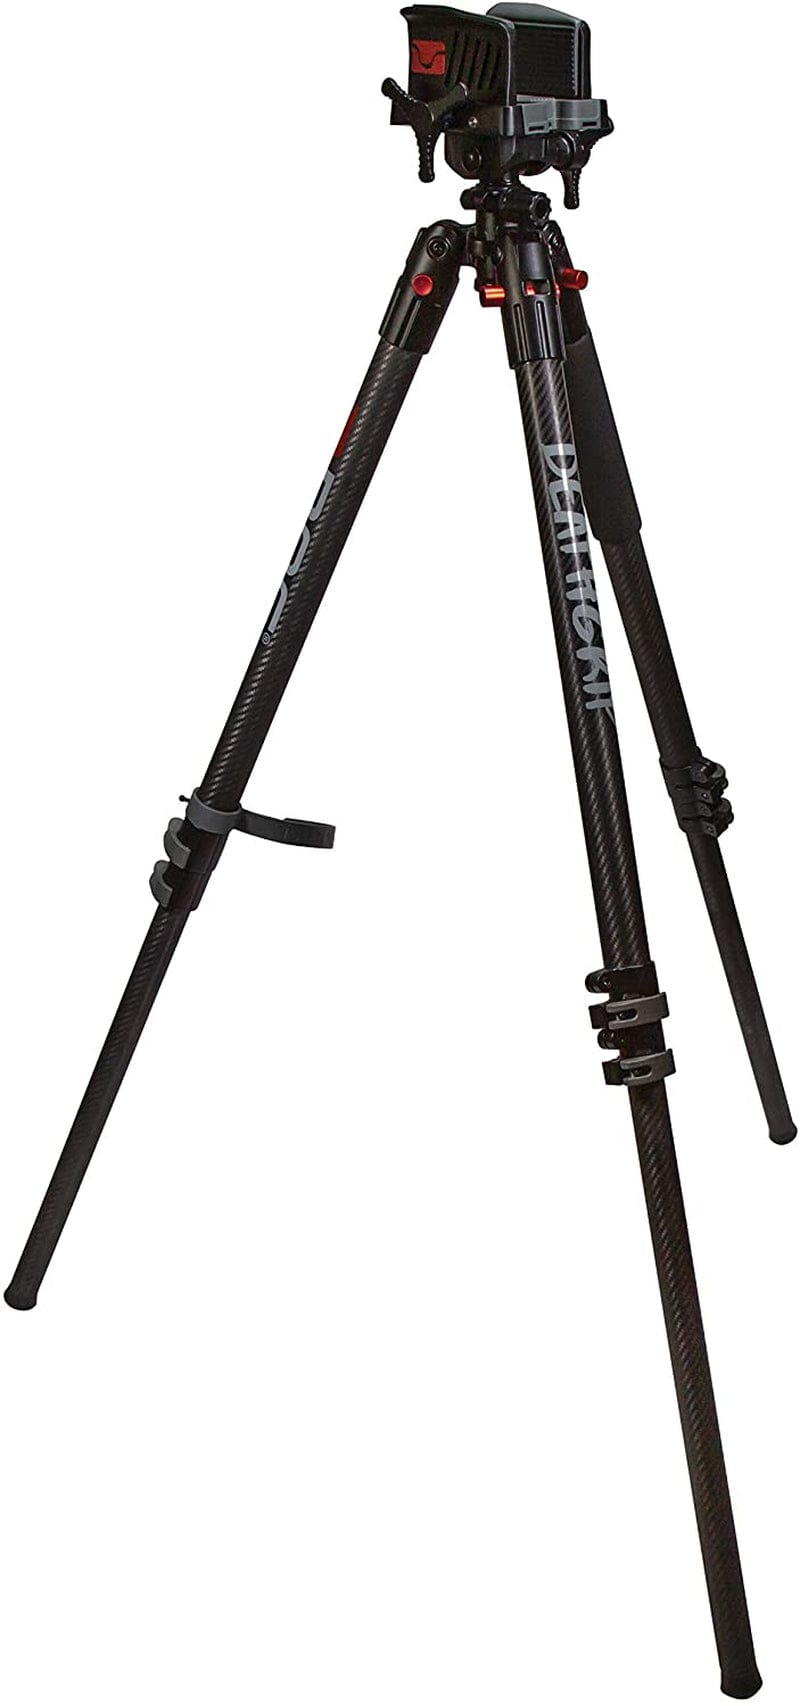 BOG Deathgrip Tripods with Durable Aluminum and Carbon Fiber Frames, Lightweight, Stable Design, Bubble Level, Adjustable Legs, and Hands-Free Operation for Hunting, Shooting, and Outdoors Sporting Goods > Outdoor Recreation > Winter Sports & Activities BOG Carbon Fiber Tripod 